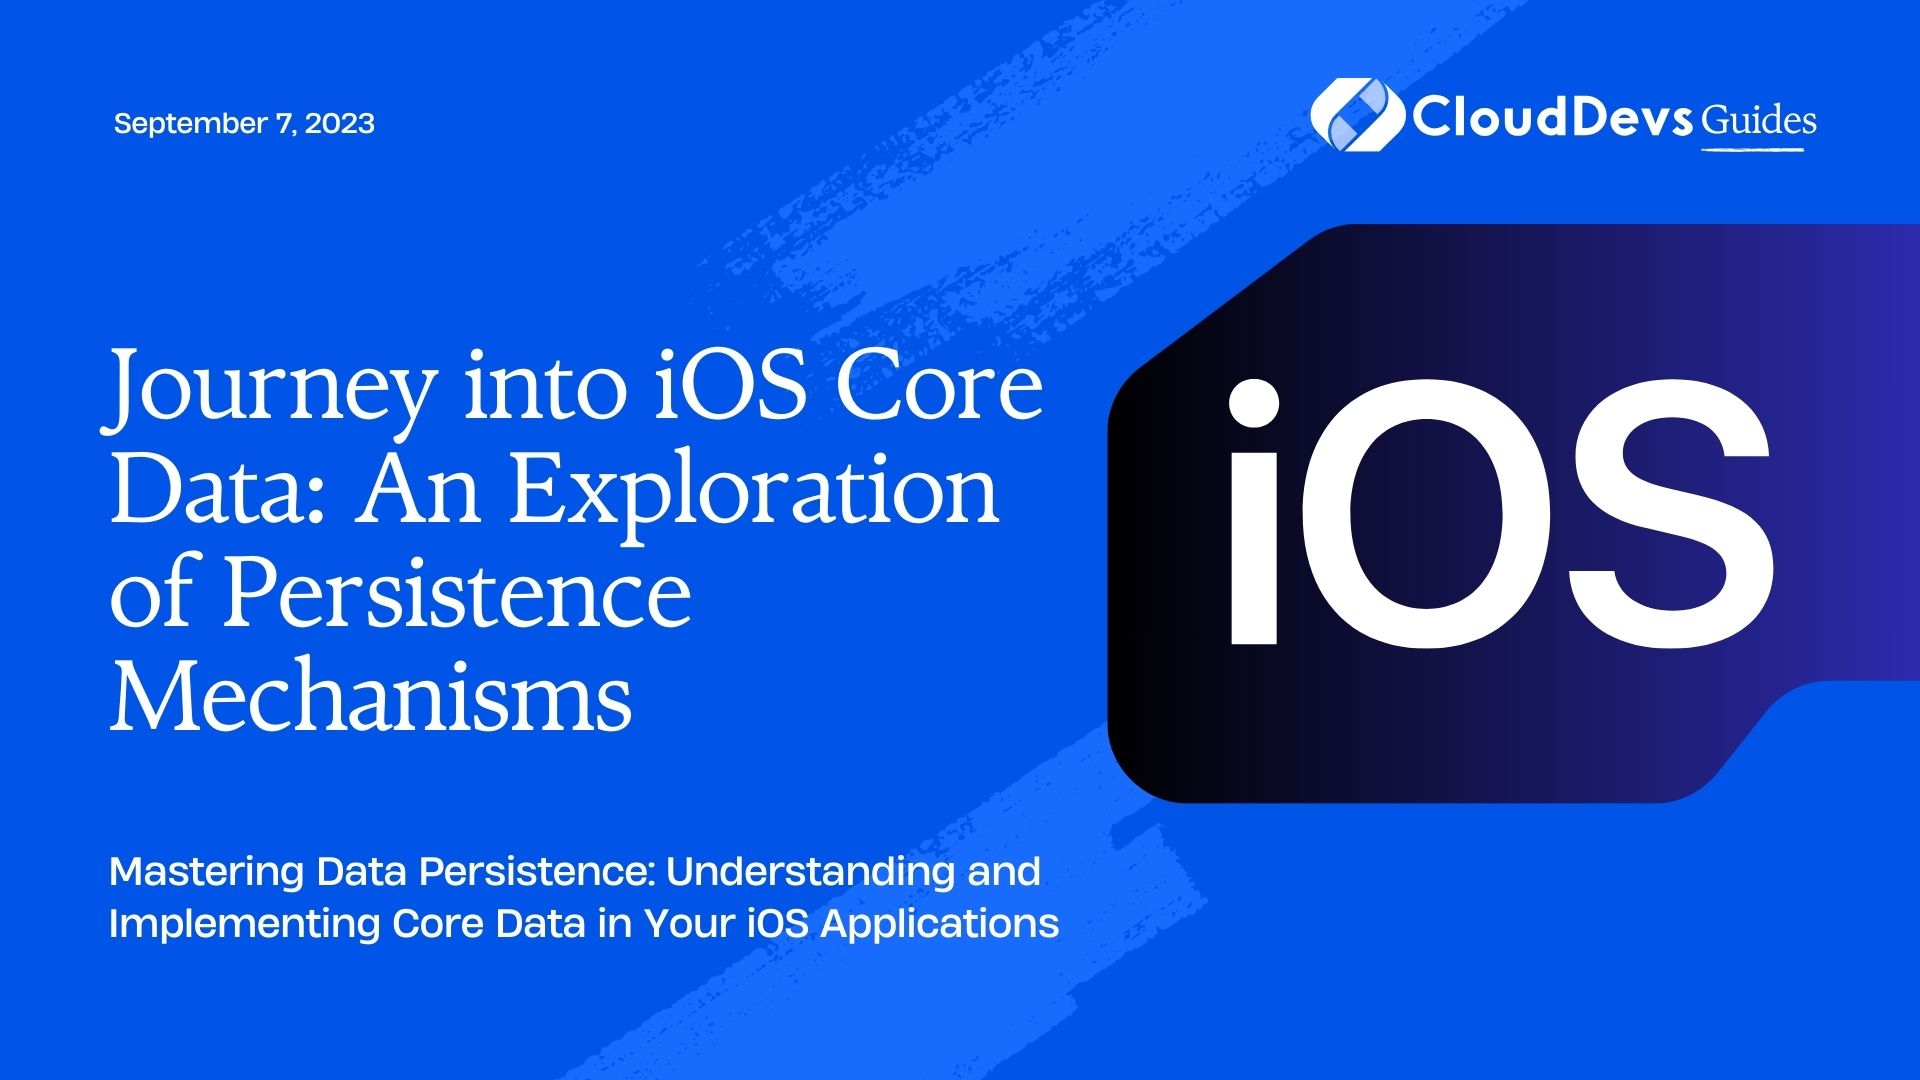 Journey into iOS Core Data: An Exploration of Persistence Mechanisms